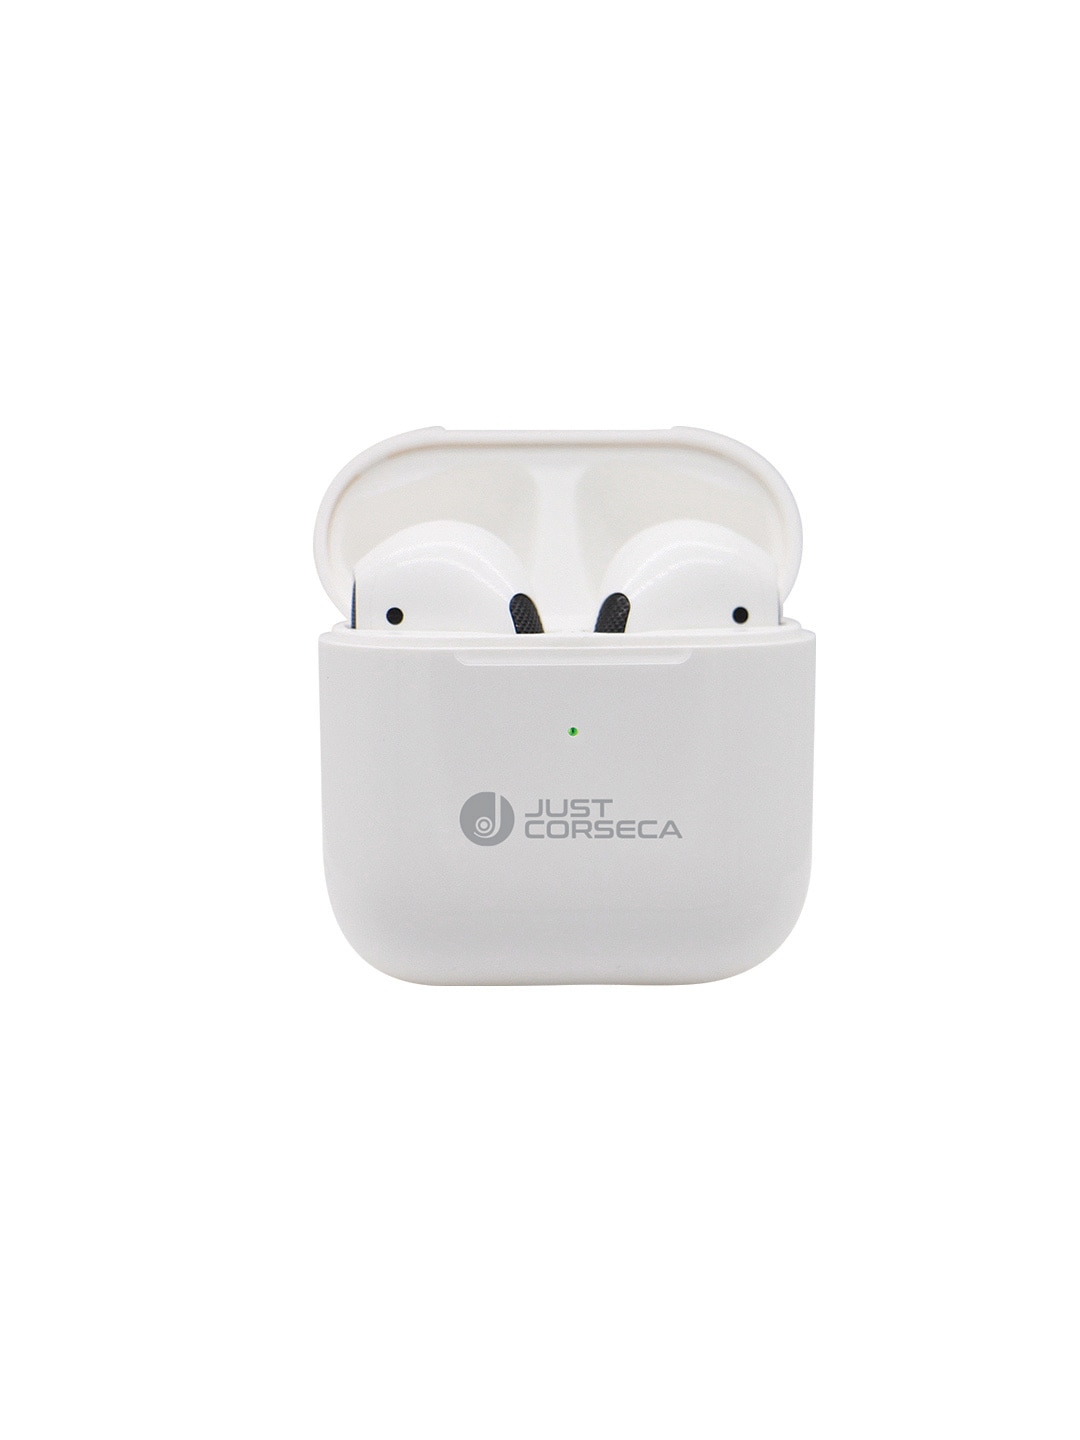 JUST CORSECA White Plum Truly Wireless Mini Powebuds 12 Hrs Playtime Price in India